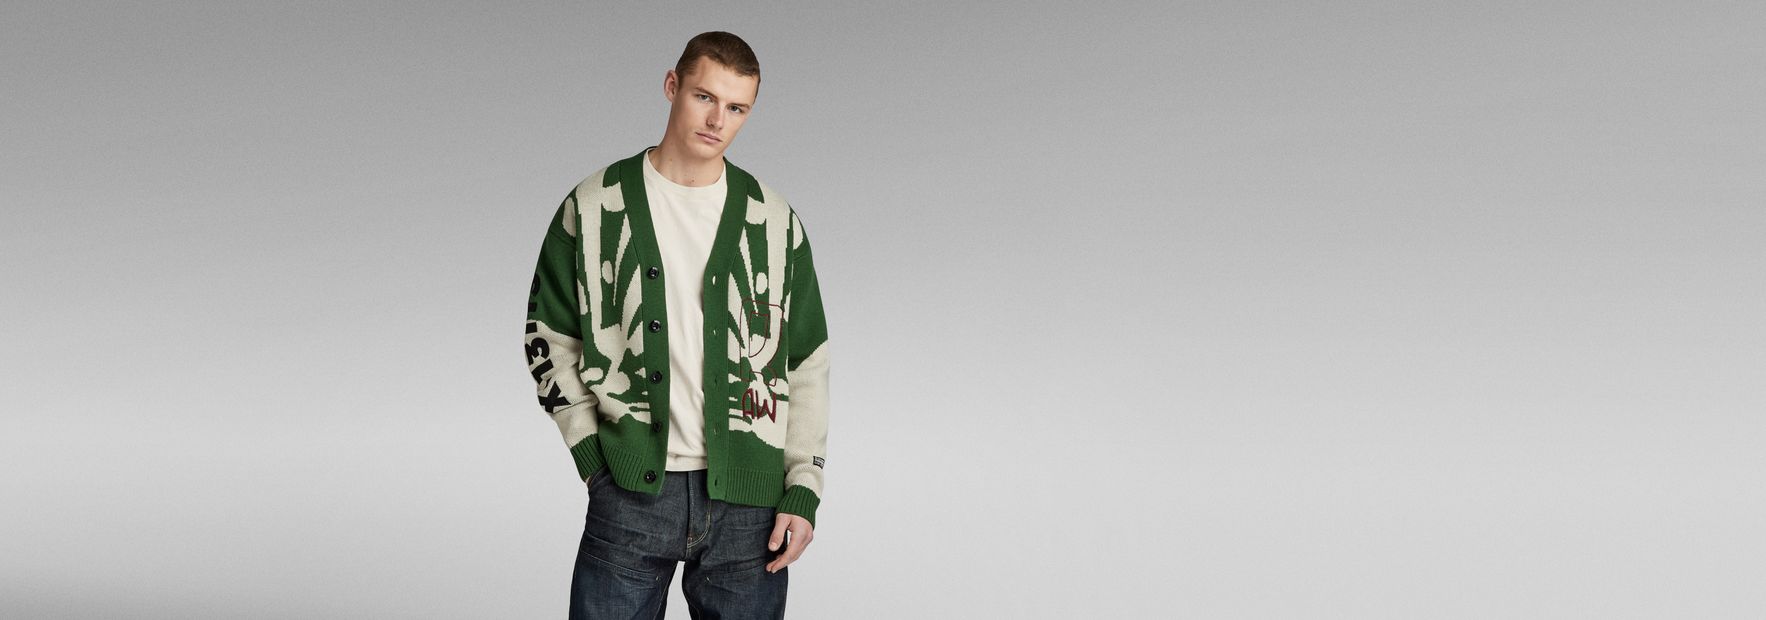 US Cardigan G-Star | Green Holiday RAW® | Knitted Loose